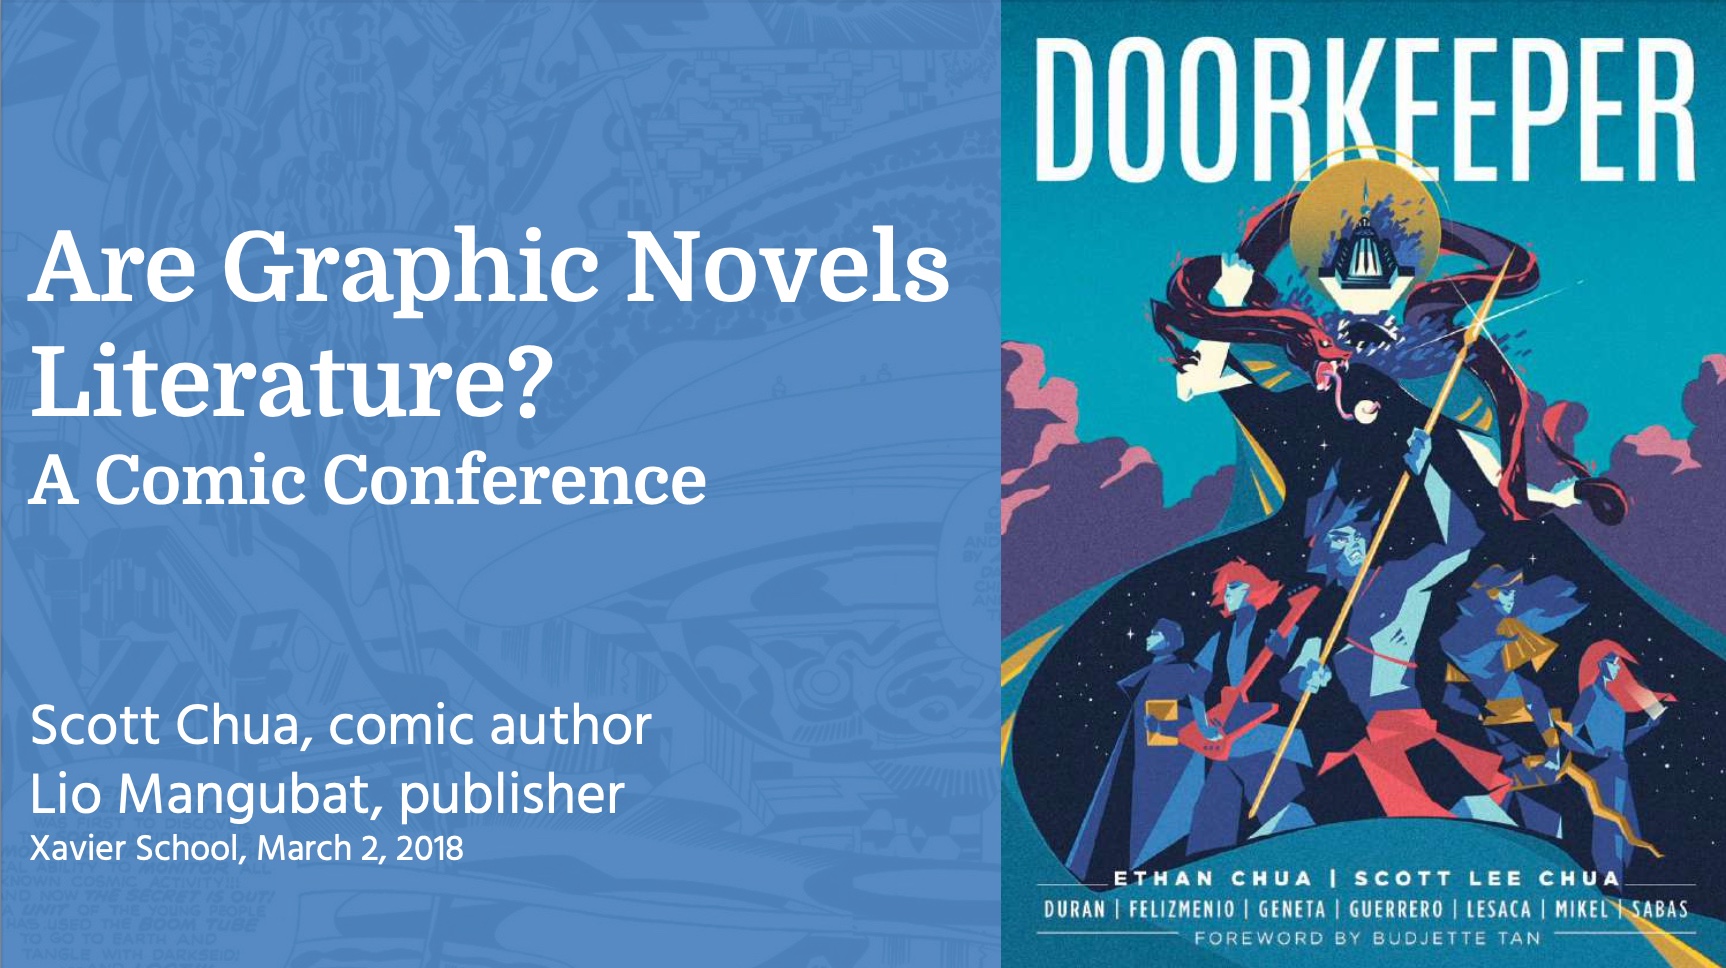 Screenshot of presentation slide. On the left is the heading, are graphic novels literature?  Next line. A comic conference. Next line. Scott Chua, comic author. Next line. Lio Mangubat, publisher. Next line. Xavier School, March 2, 2018. On the right is the cover page of Doorkeeper written by Ethan Chua and Scott Lee Chua. Next line. Surnames of artists, from left to right. Duran, Felizmenio, Geneta, Guerrero, Lesaca, Mikel, Sabas.